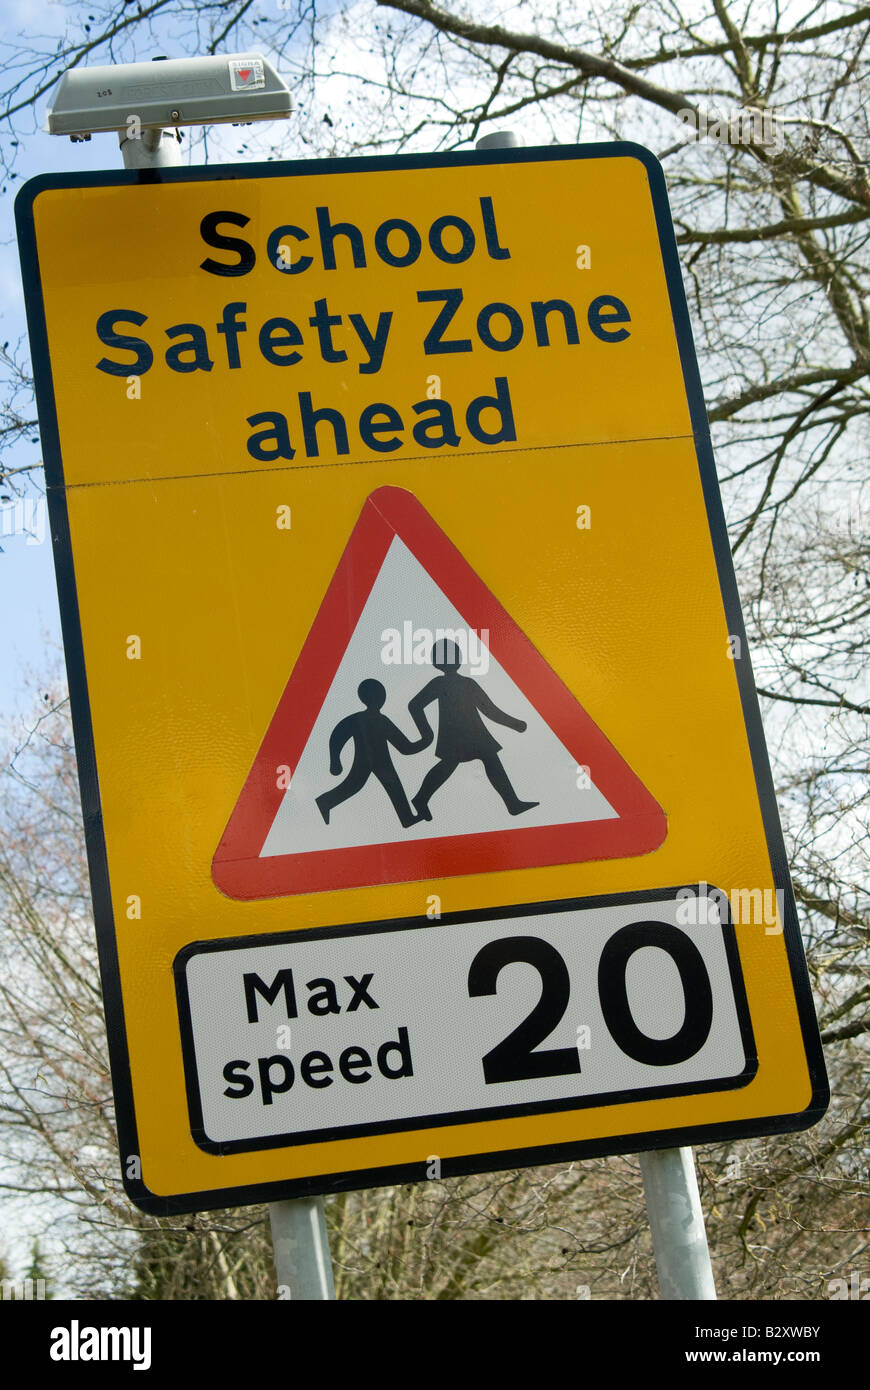 sign warning of school safety zone ahead with a maximum speed limit of 20 miles per hour in the uk Stock Photo